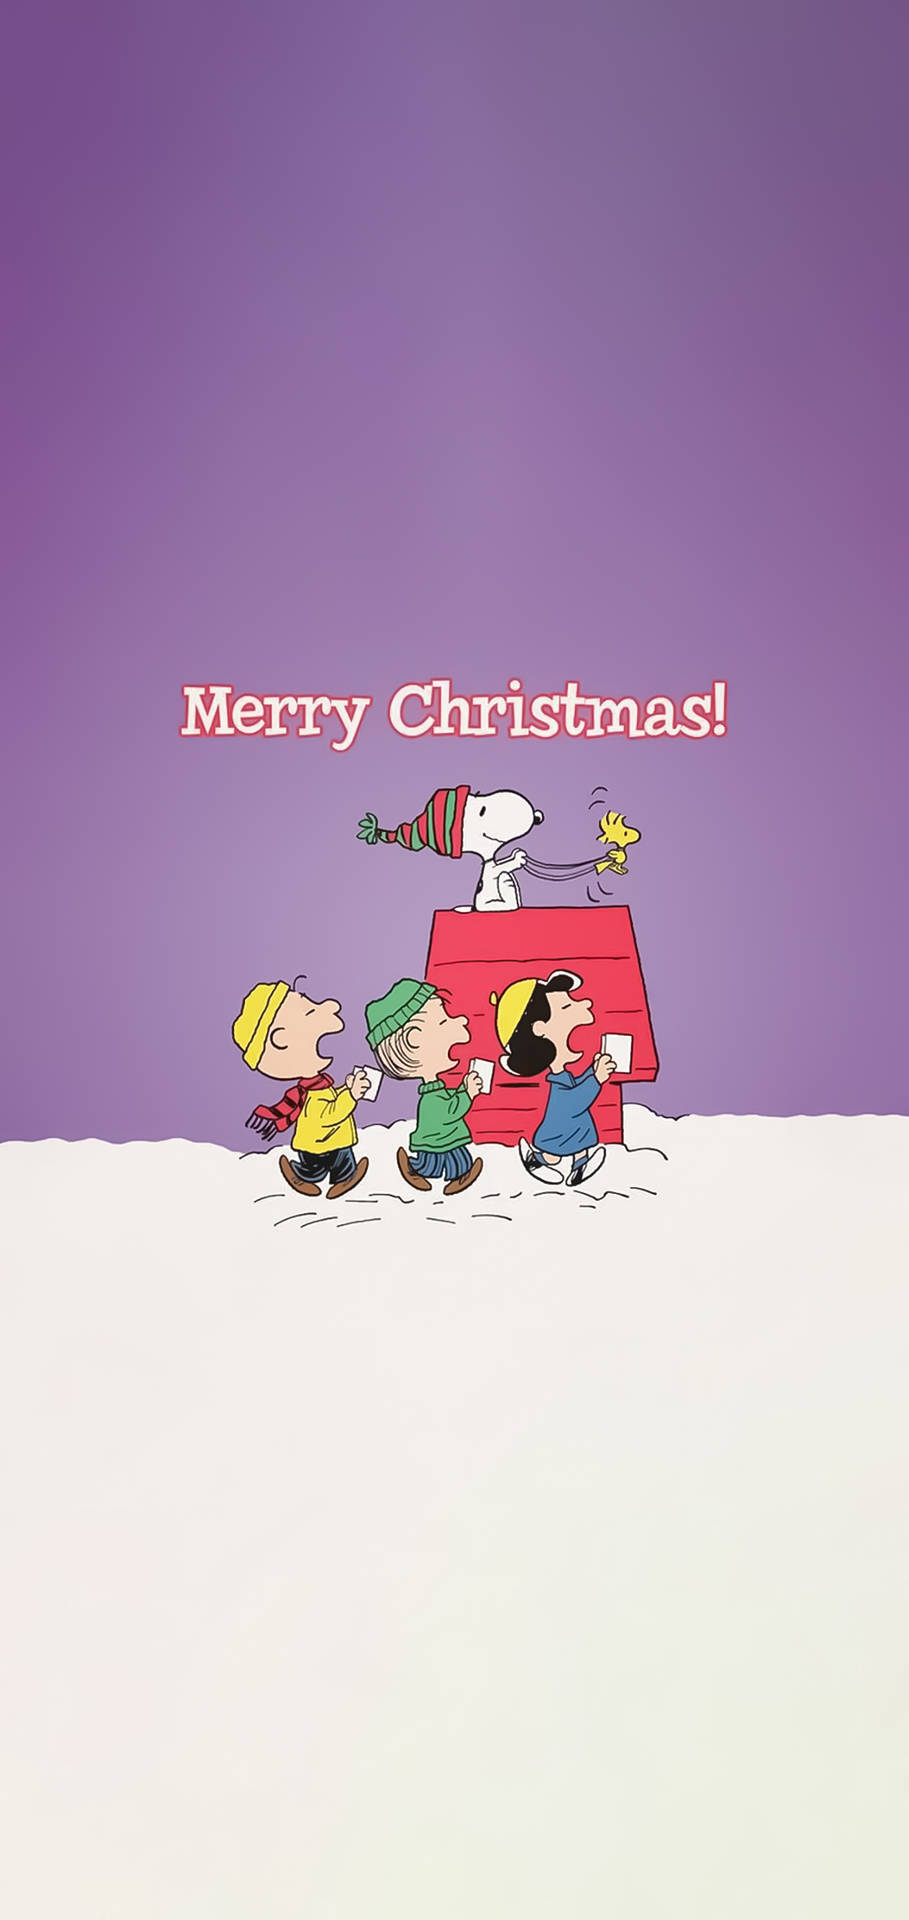 Snoopy Christmas wallpaper hd free download